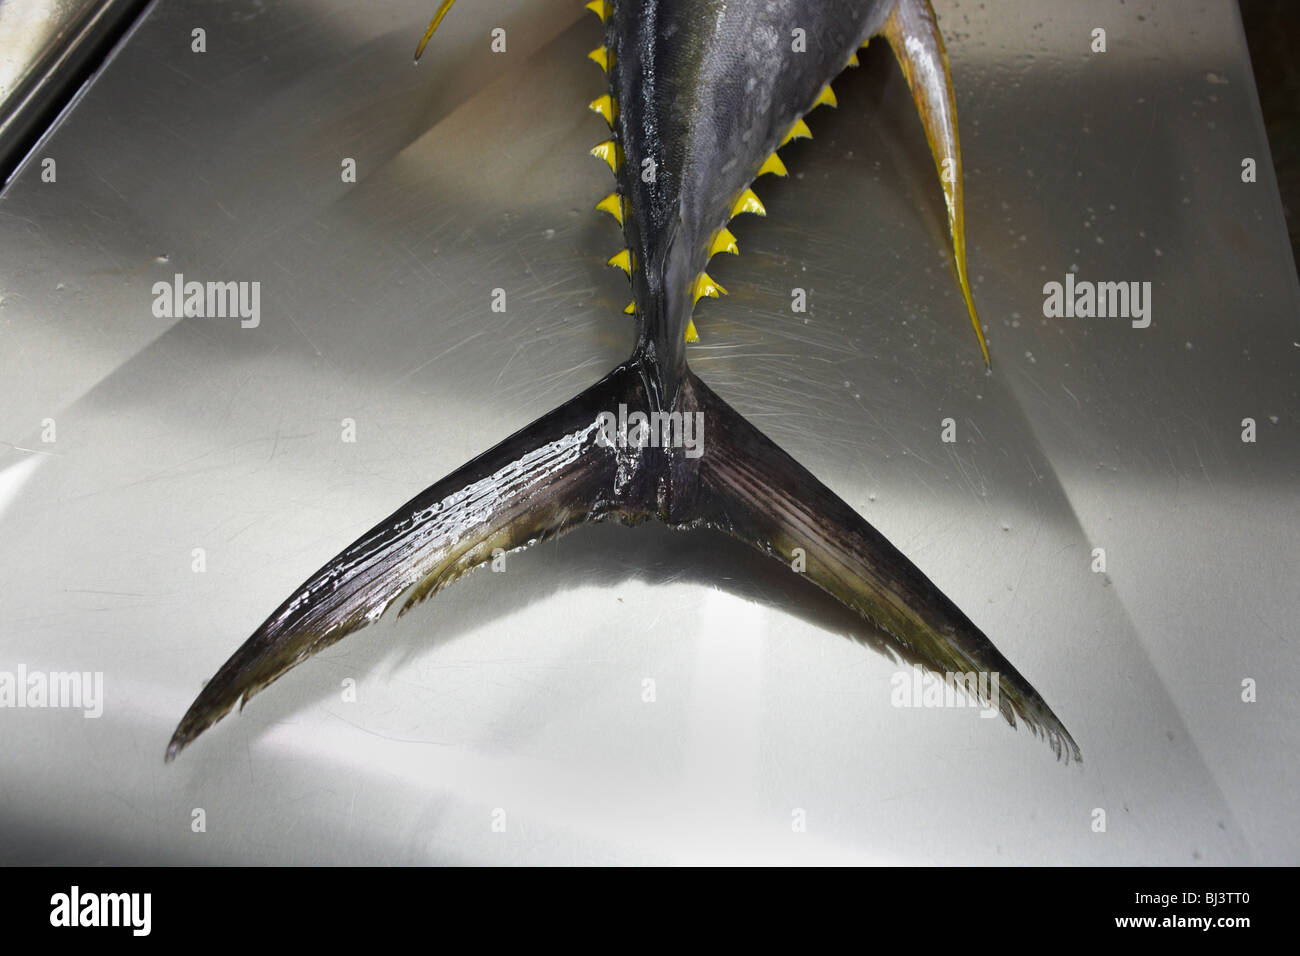 The tail and sharp barbs of a freshly-caught yellow fin tuna fish lies inert on a filleting table. Stock Photo